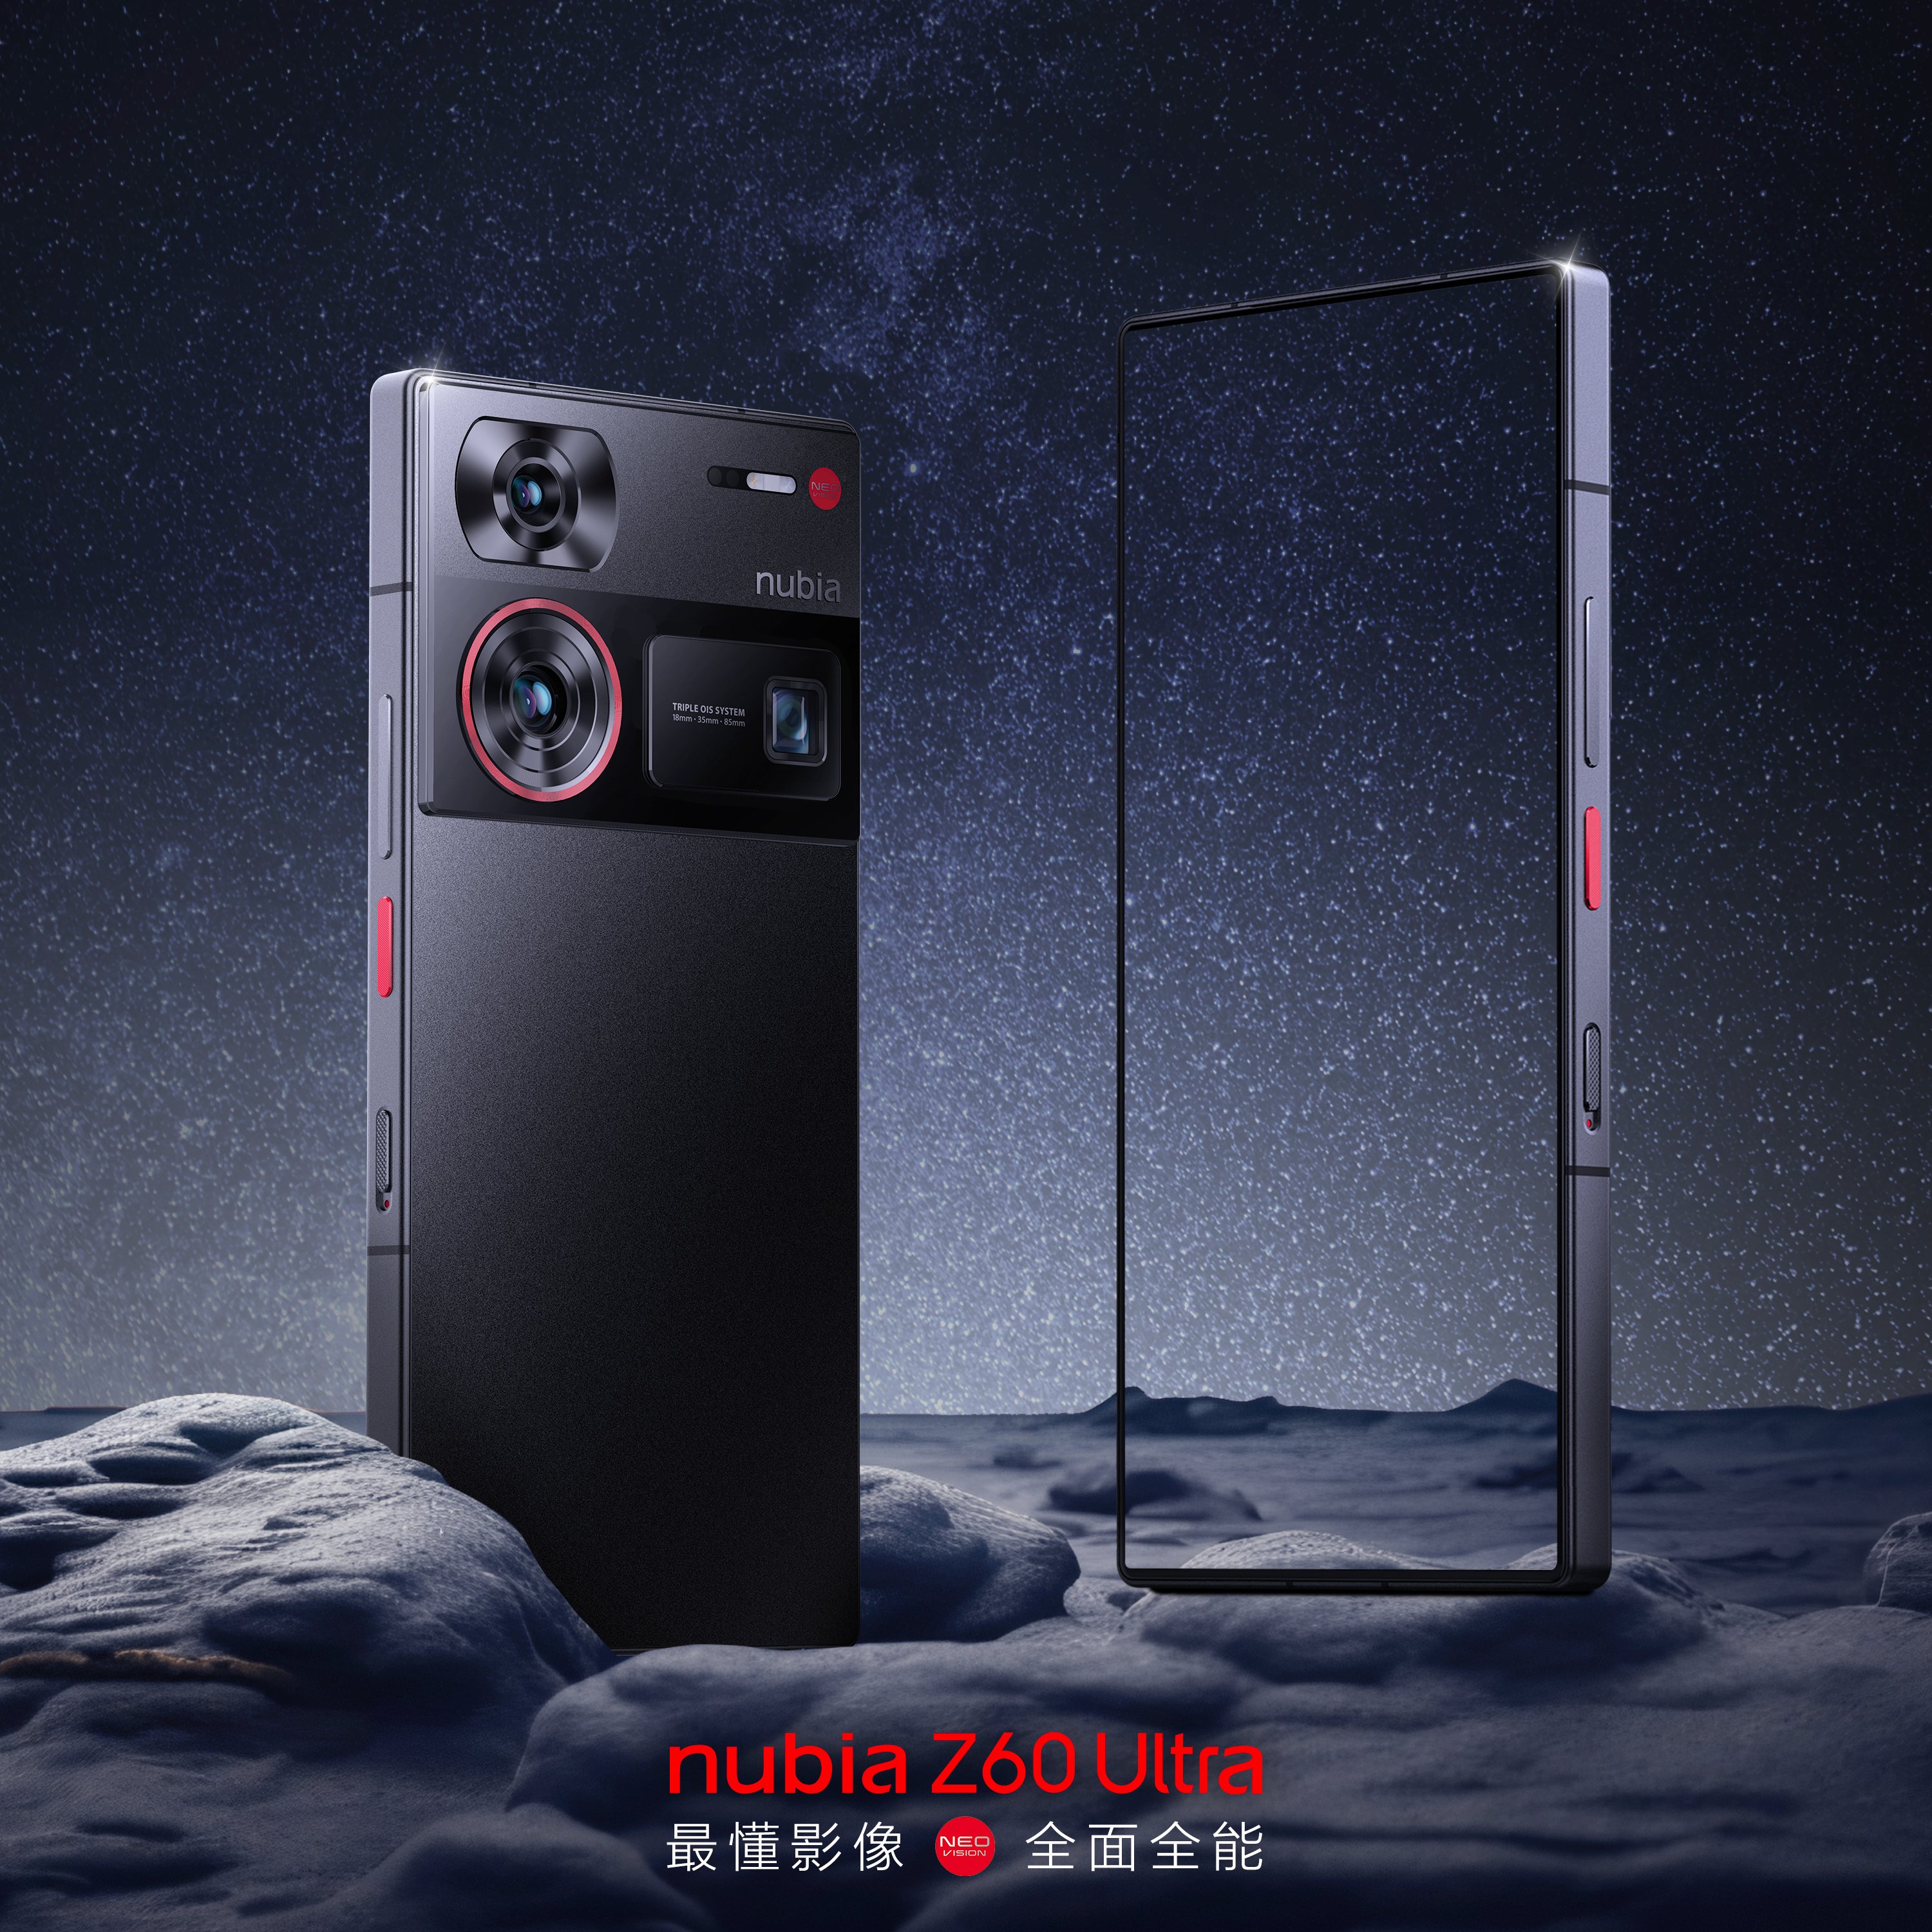 Here's what the Nubia Z60 Ultra flagship will look like